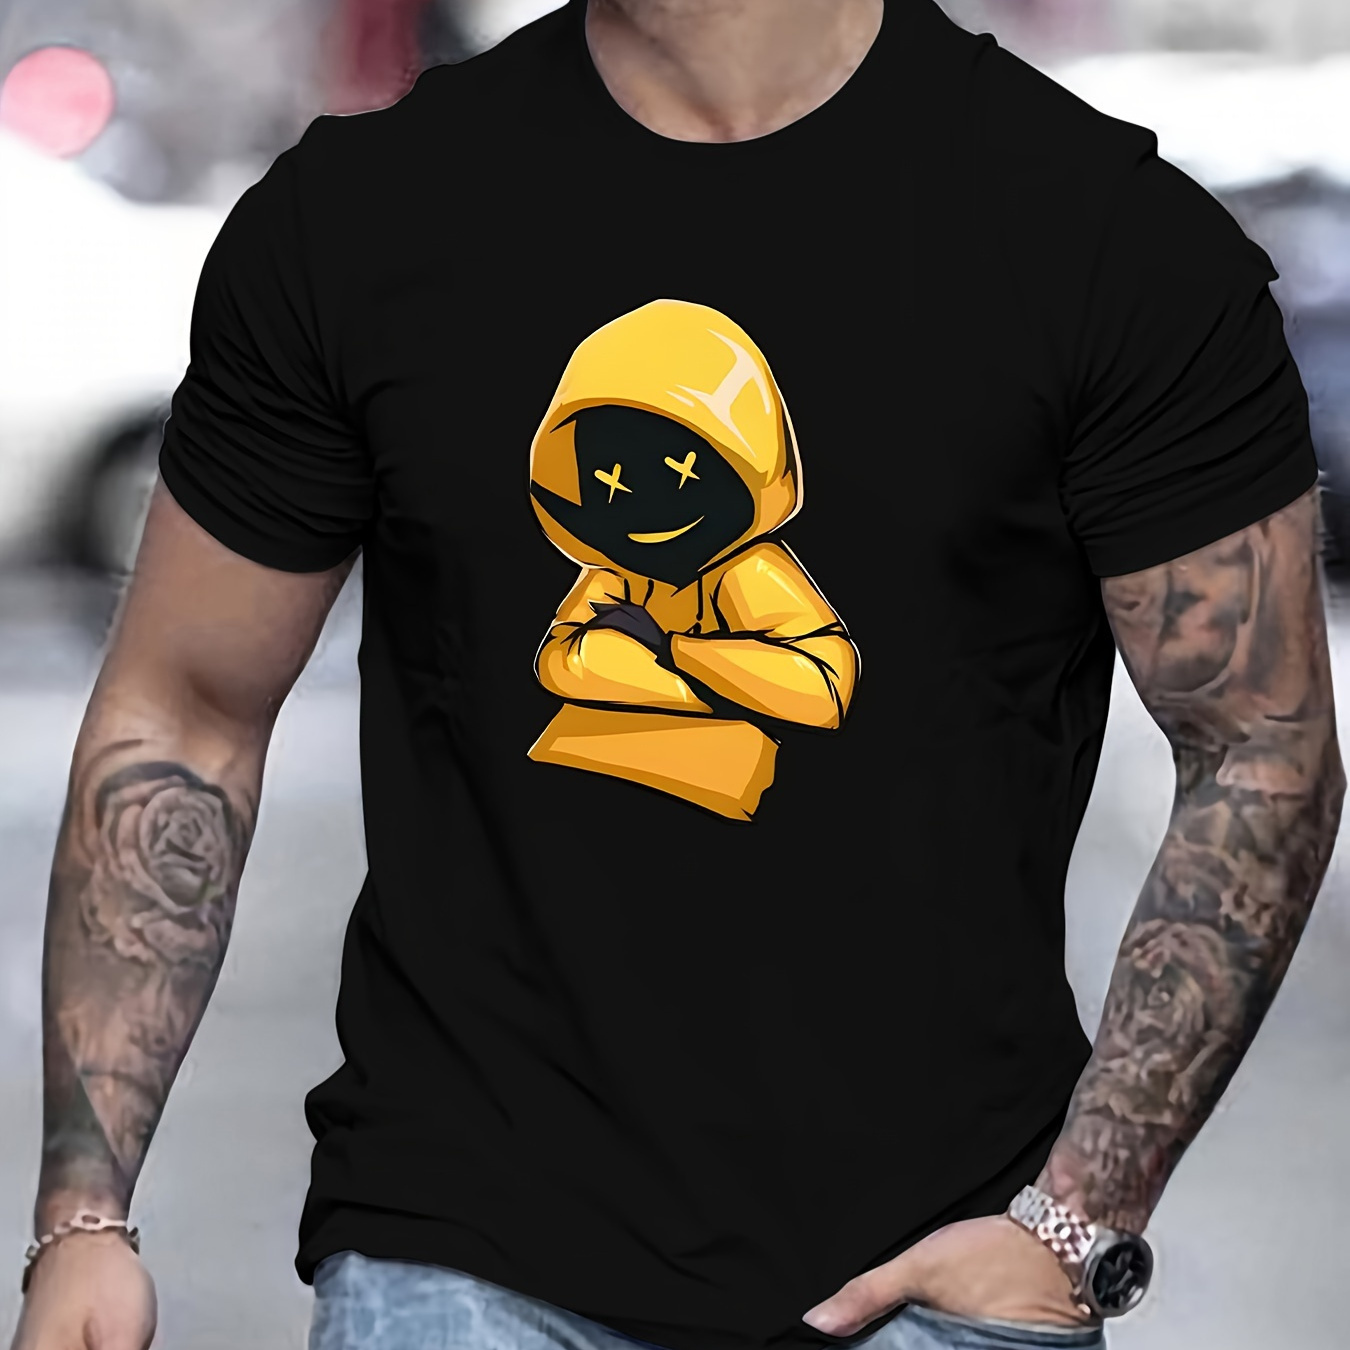 

Yellow Hooded Print Tees For Men, Casual Crew Neck Short Sleeve T-shirt, Comfortable Breathable T-shirt For All Seasons